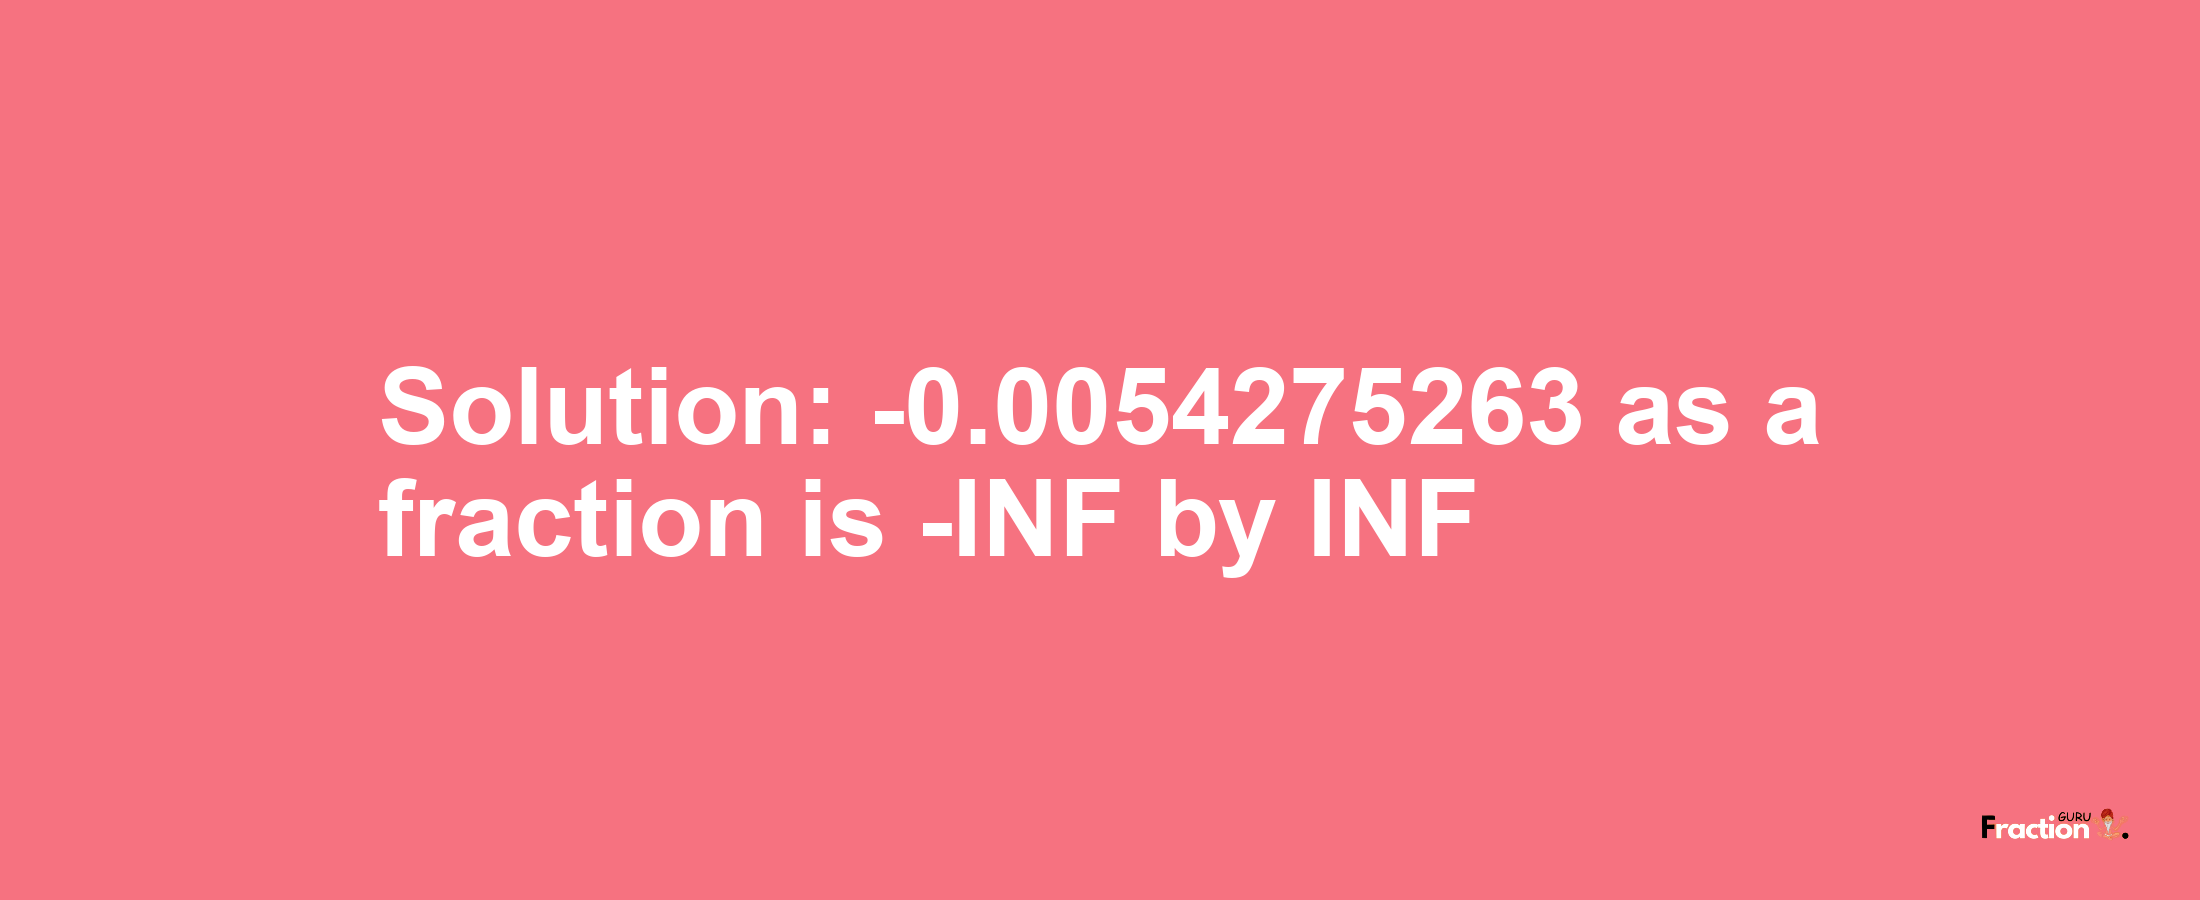 Solution:-0.0054275263 as a fraction is -INF/INF